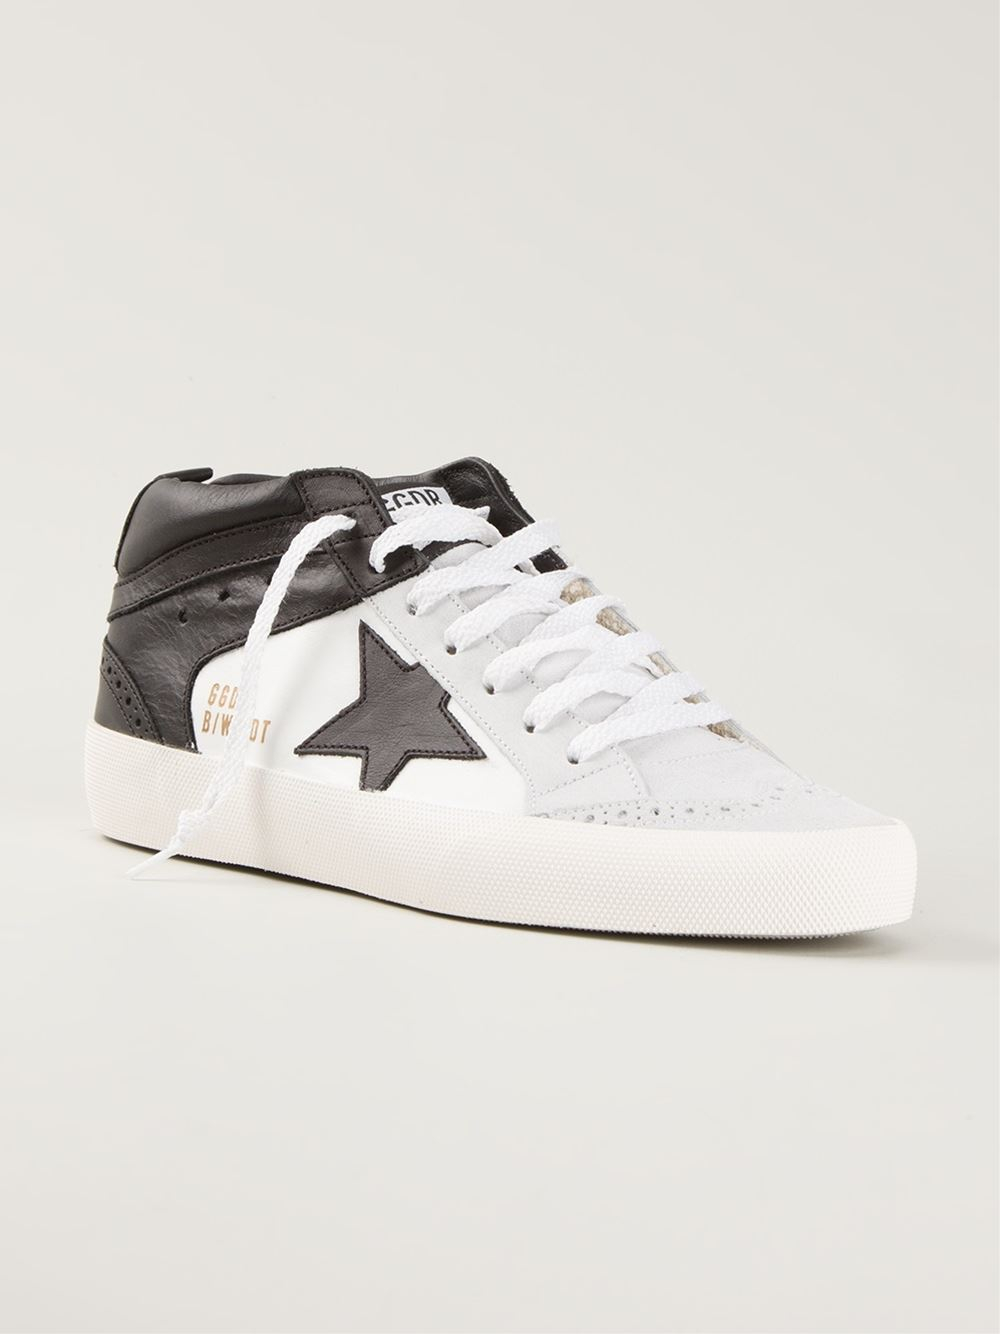 Golden Goose 'Mid/Star Limited Edition' Sneakers in Black | Lyst